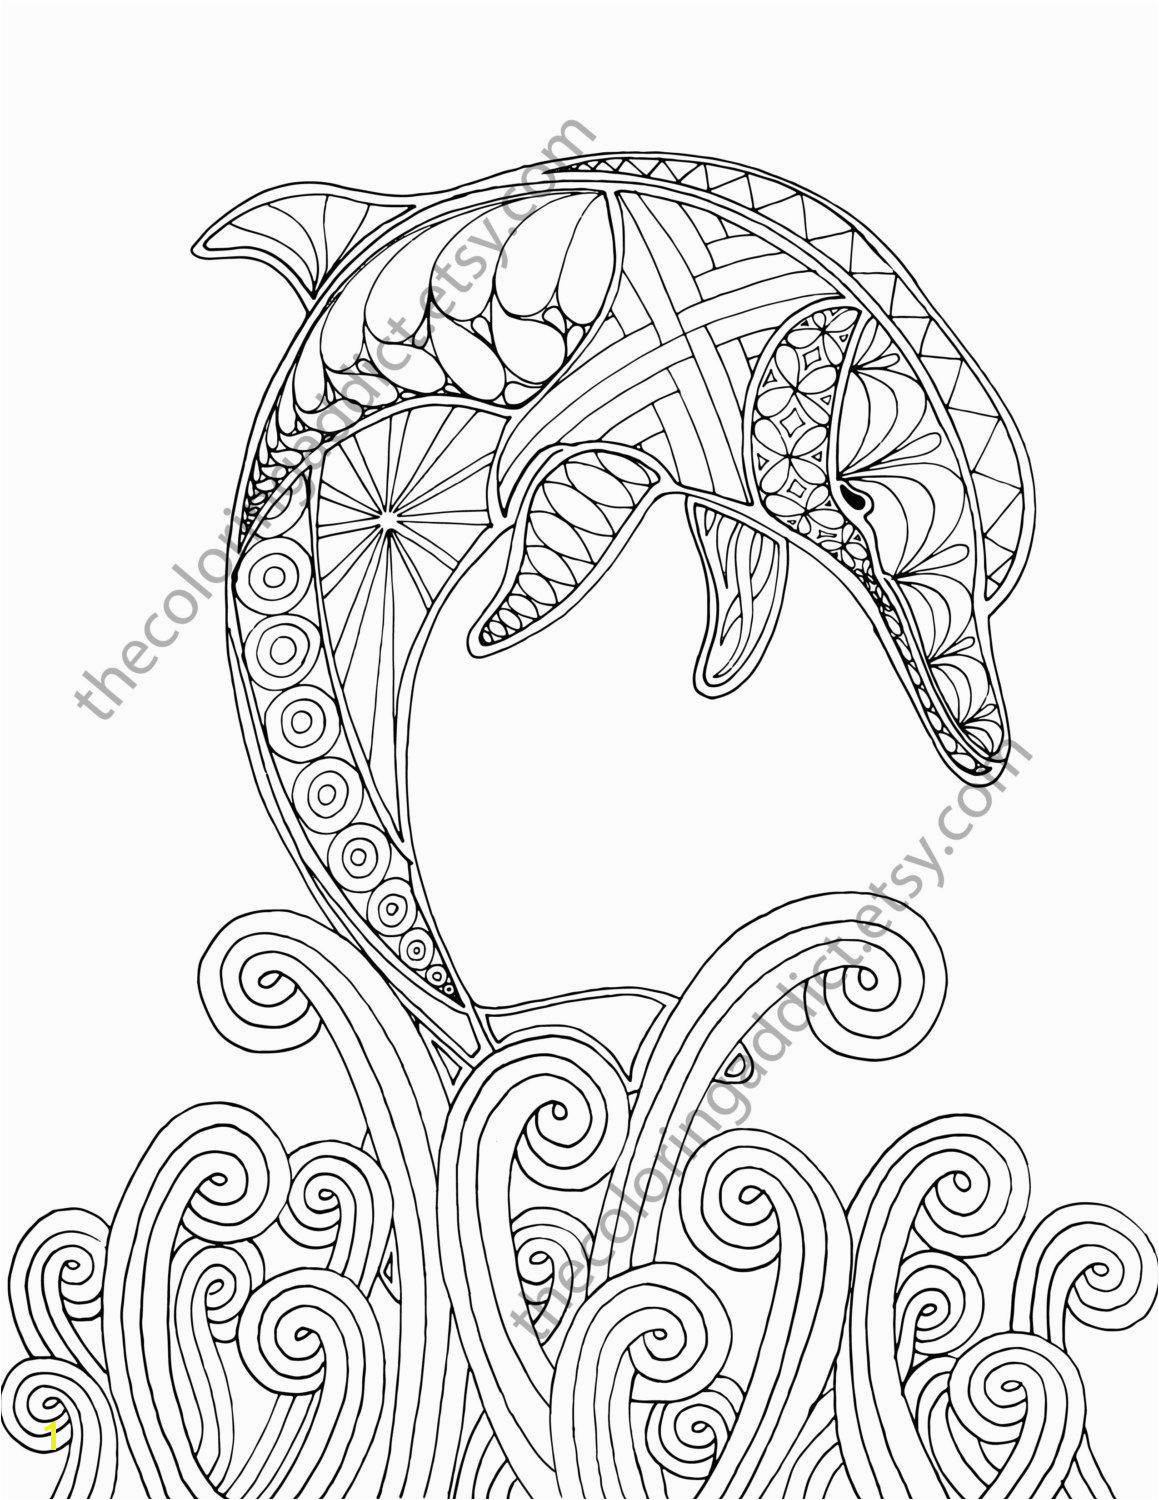 dolphin coloring page adult coloring sheet by TheColoringAddict